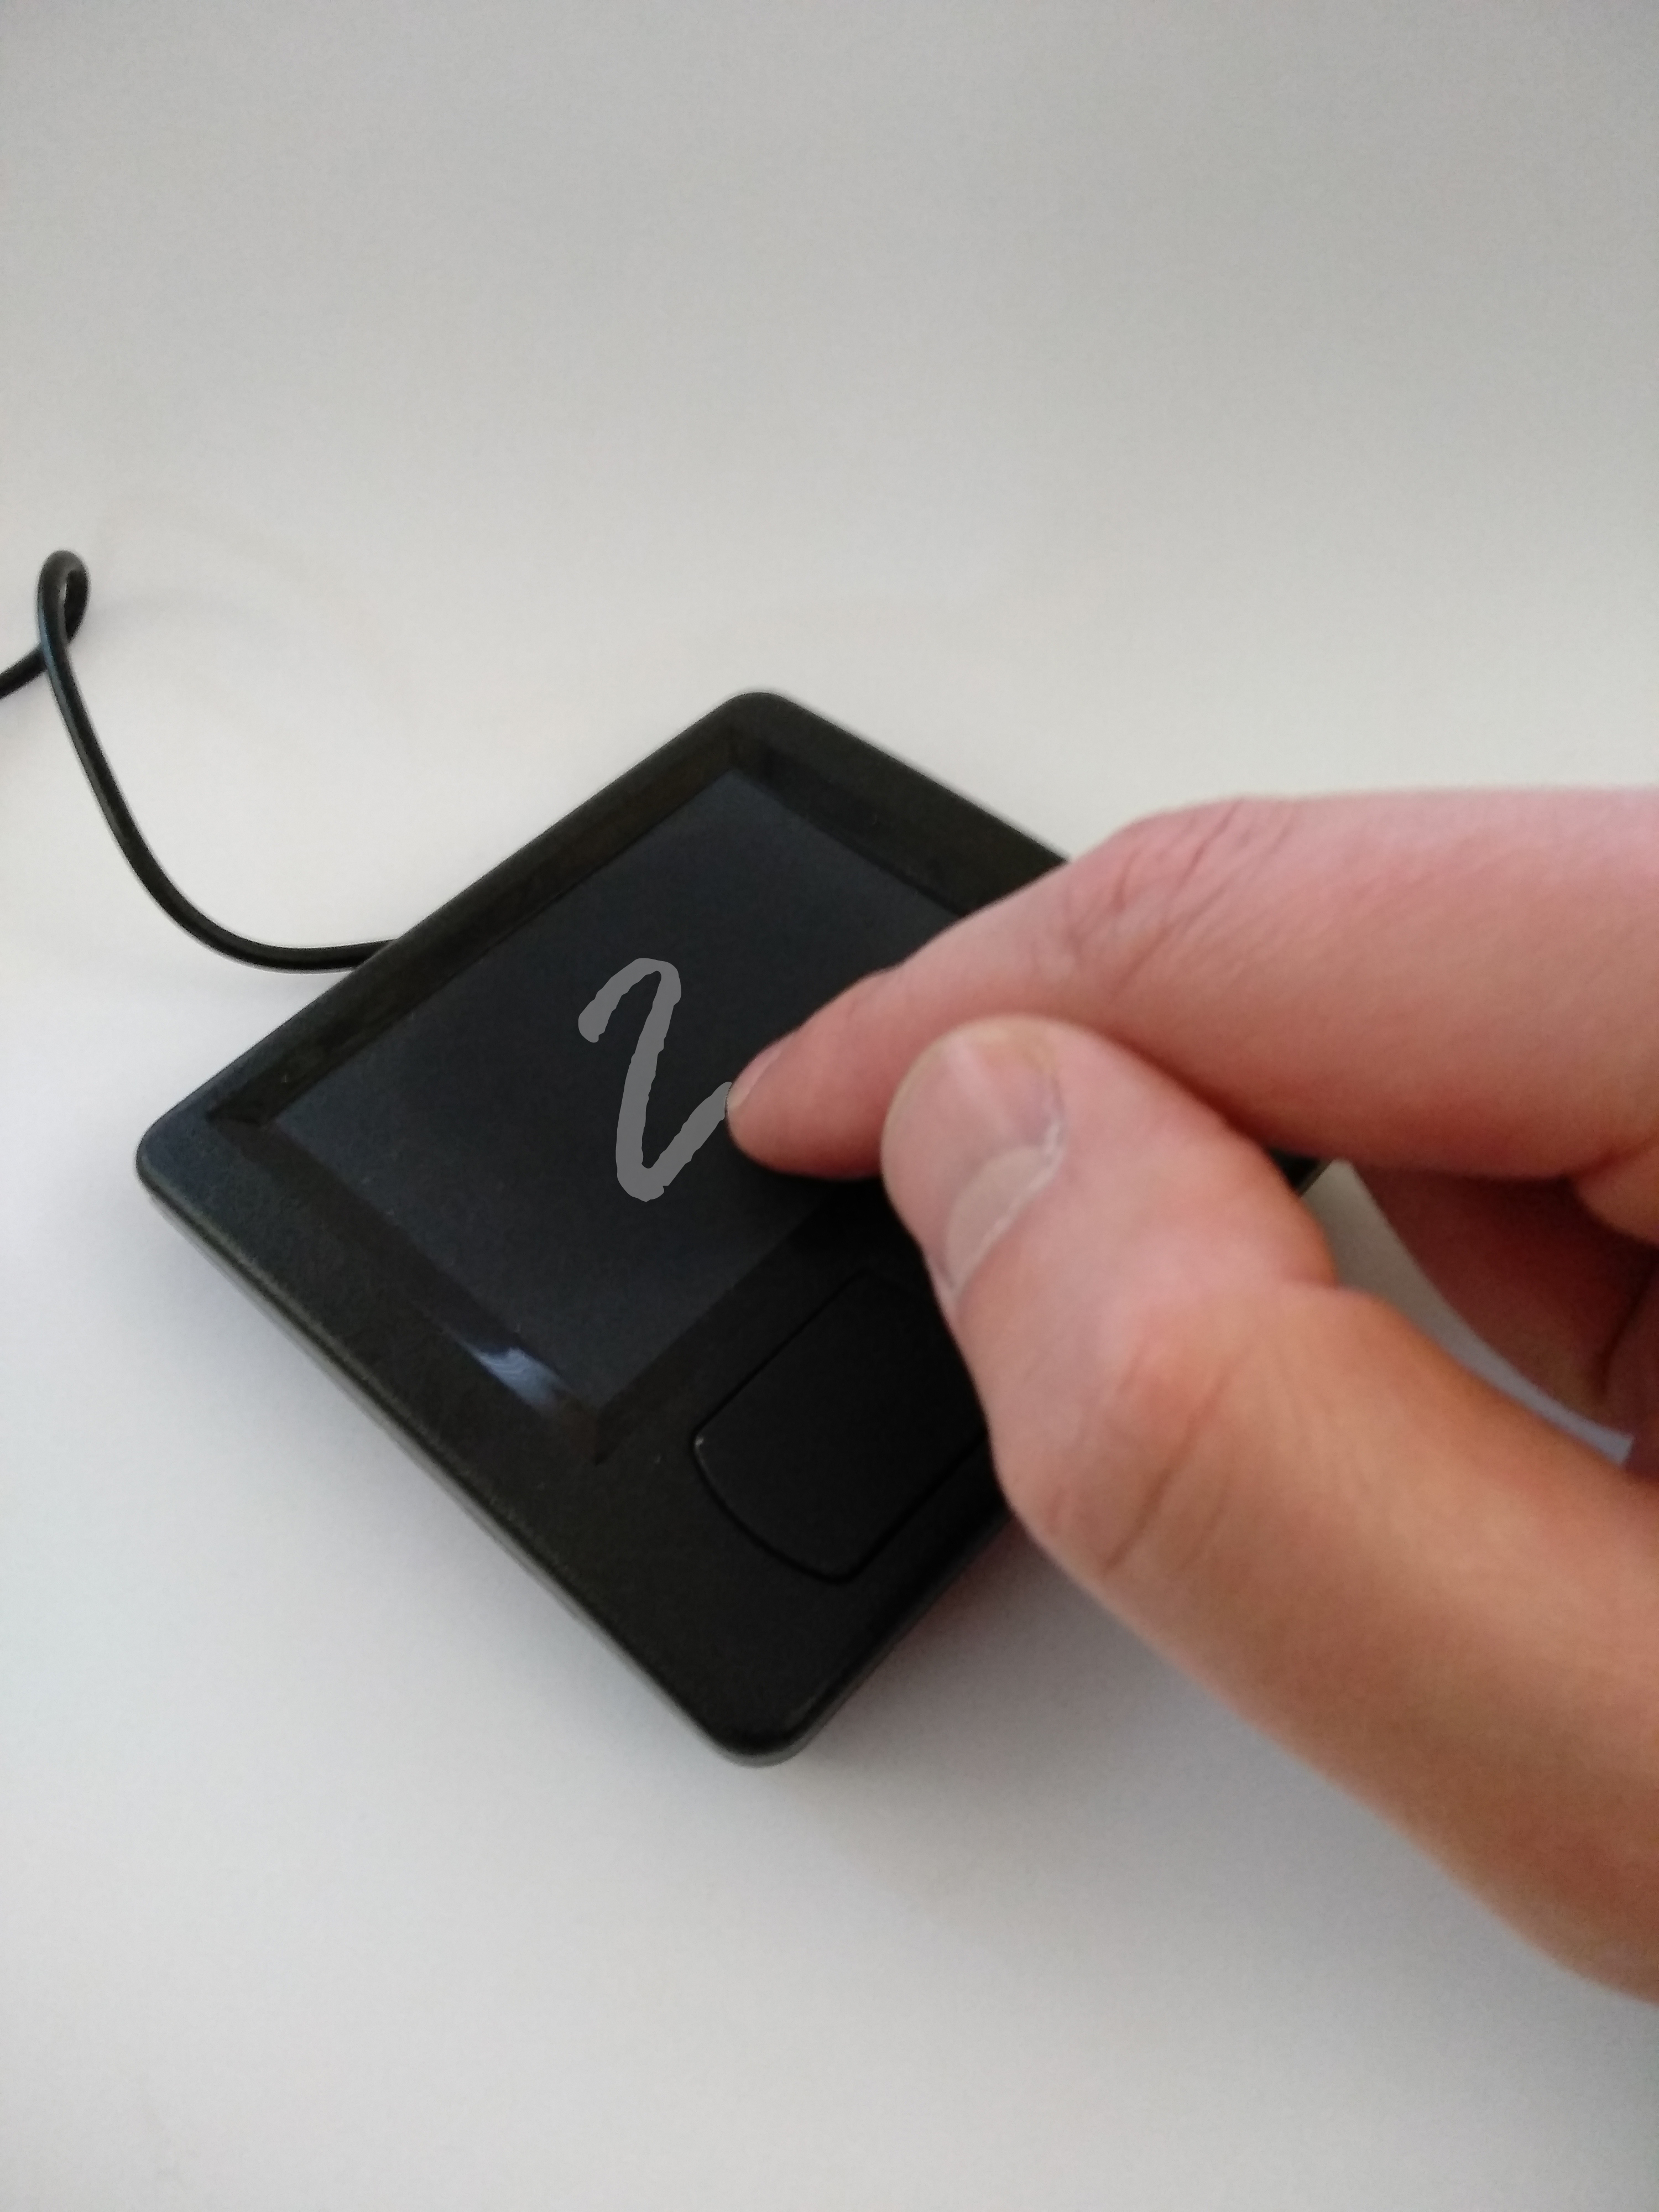 Image of a touchpad on which a digit is written with a finger.